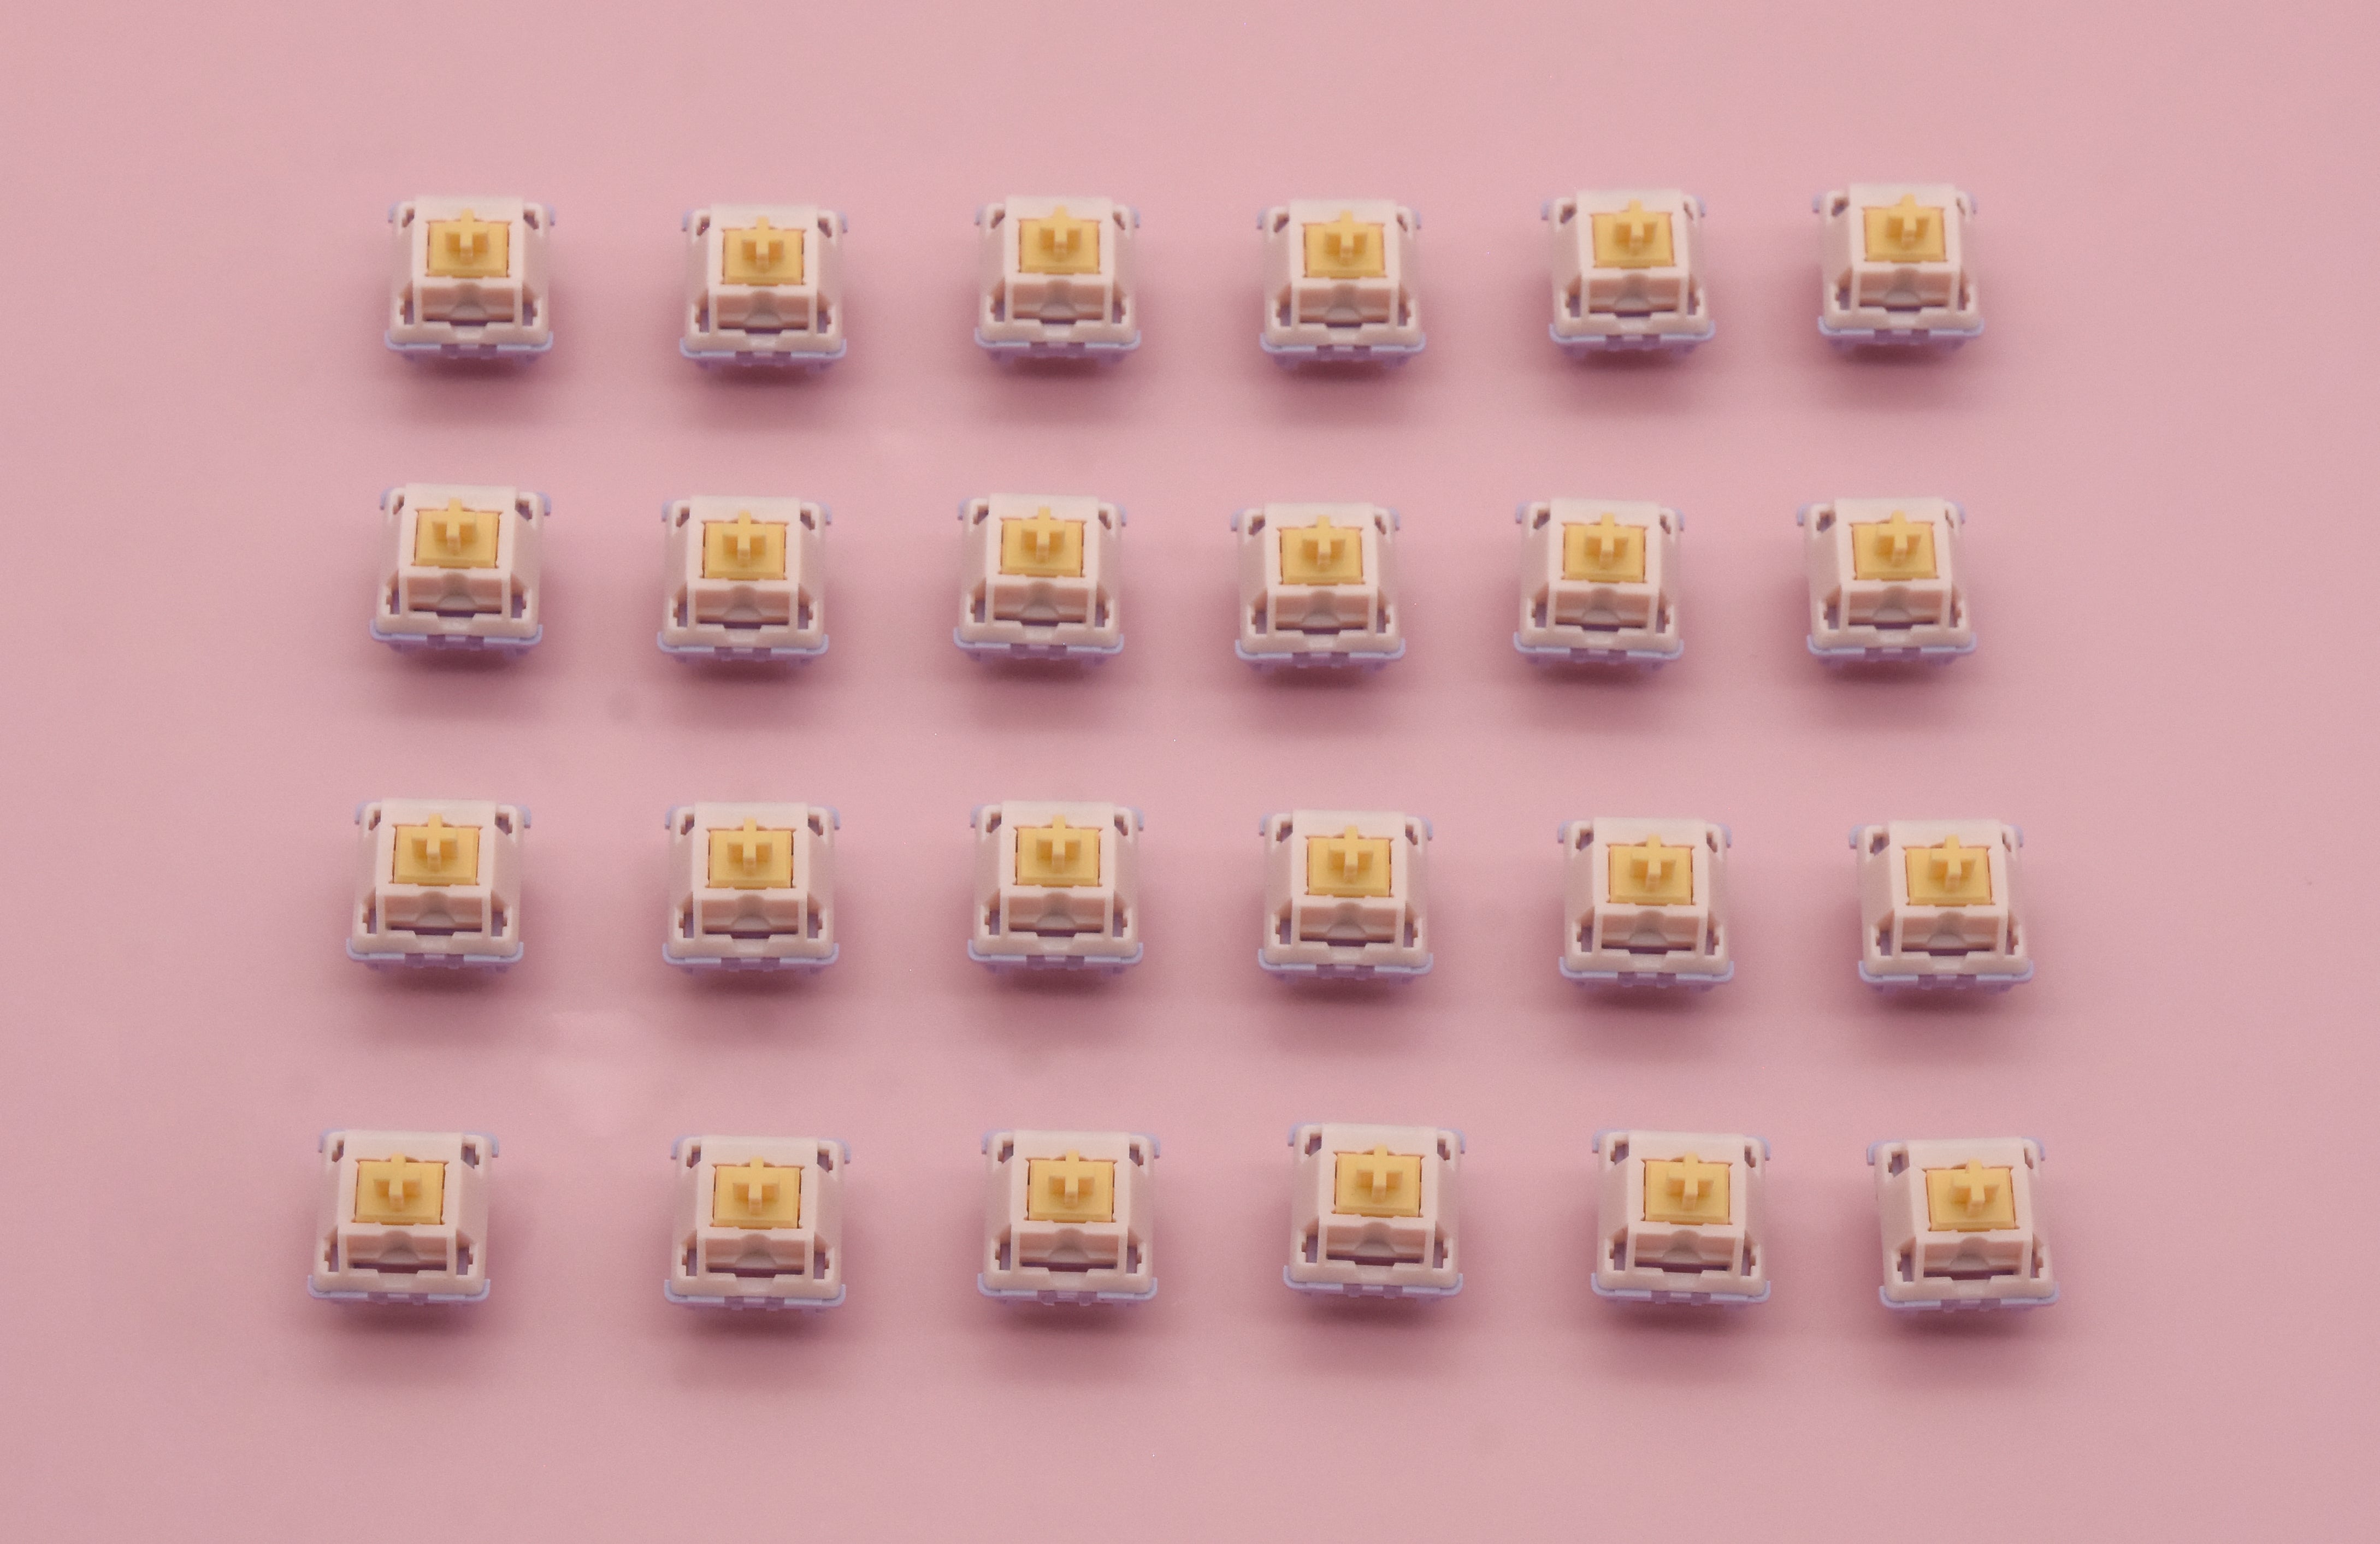 MMD PRINCESS TACTILE V2 SWITCH FACTORY LUBED EDITION (10PCS)